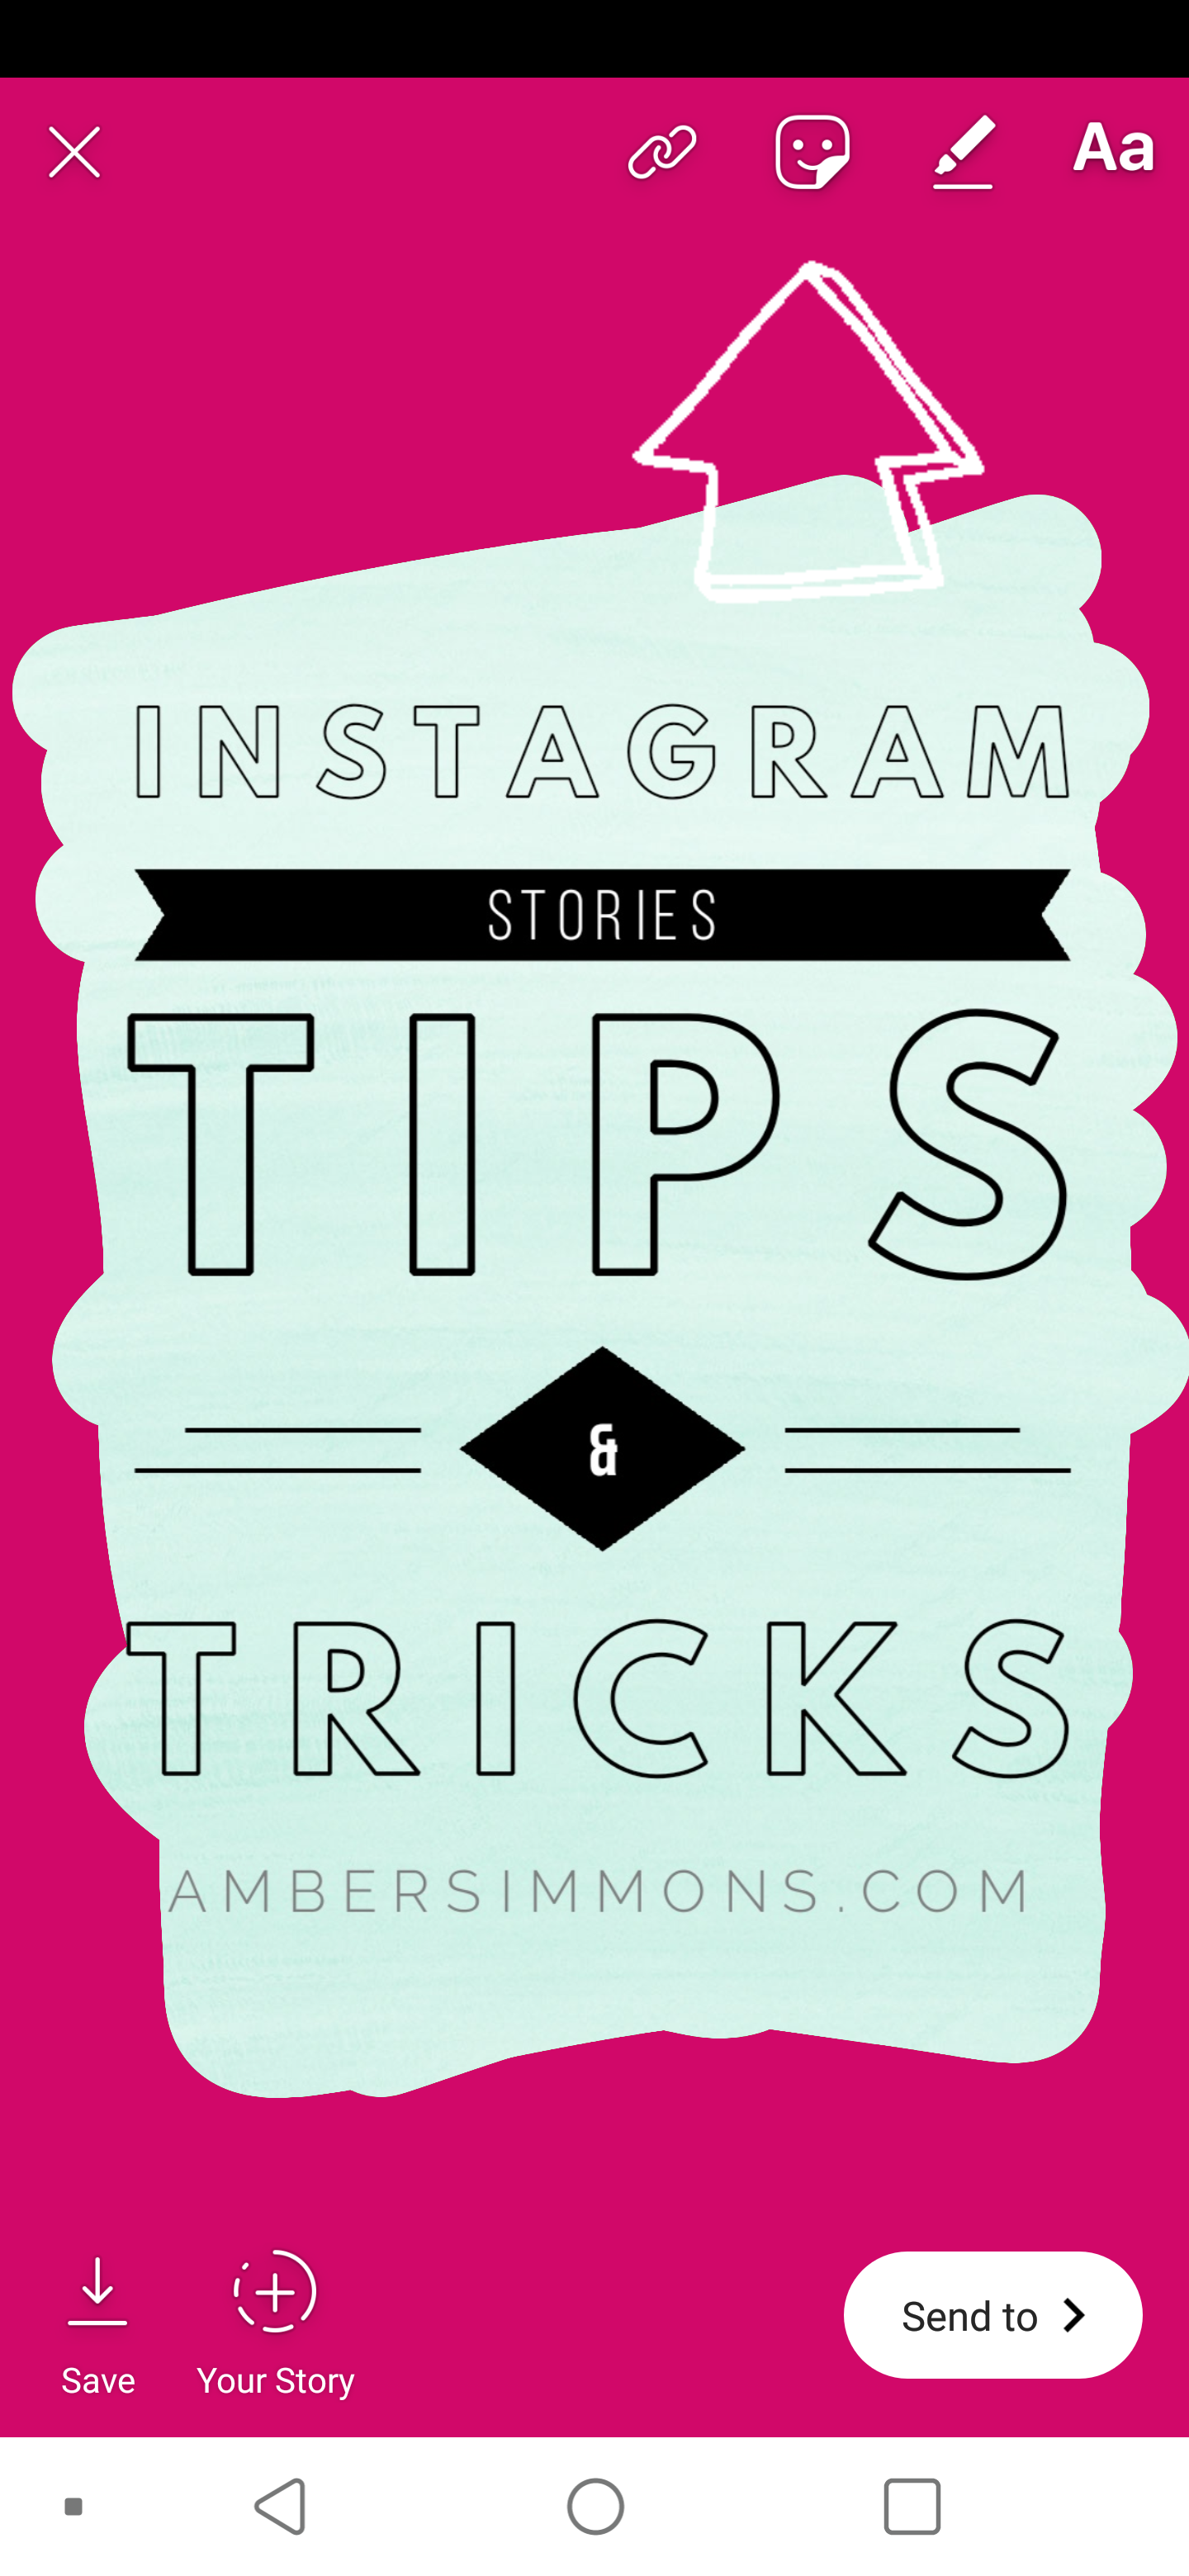 Instagram stories are a fun way to connect with your community. These Instagram stories tips and tricks will have you posting like a pro in no time.